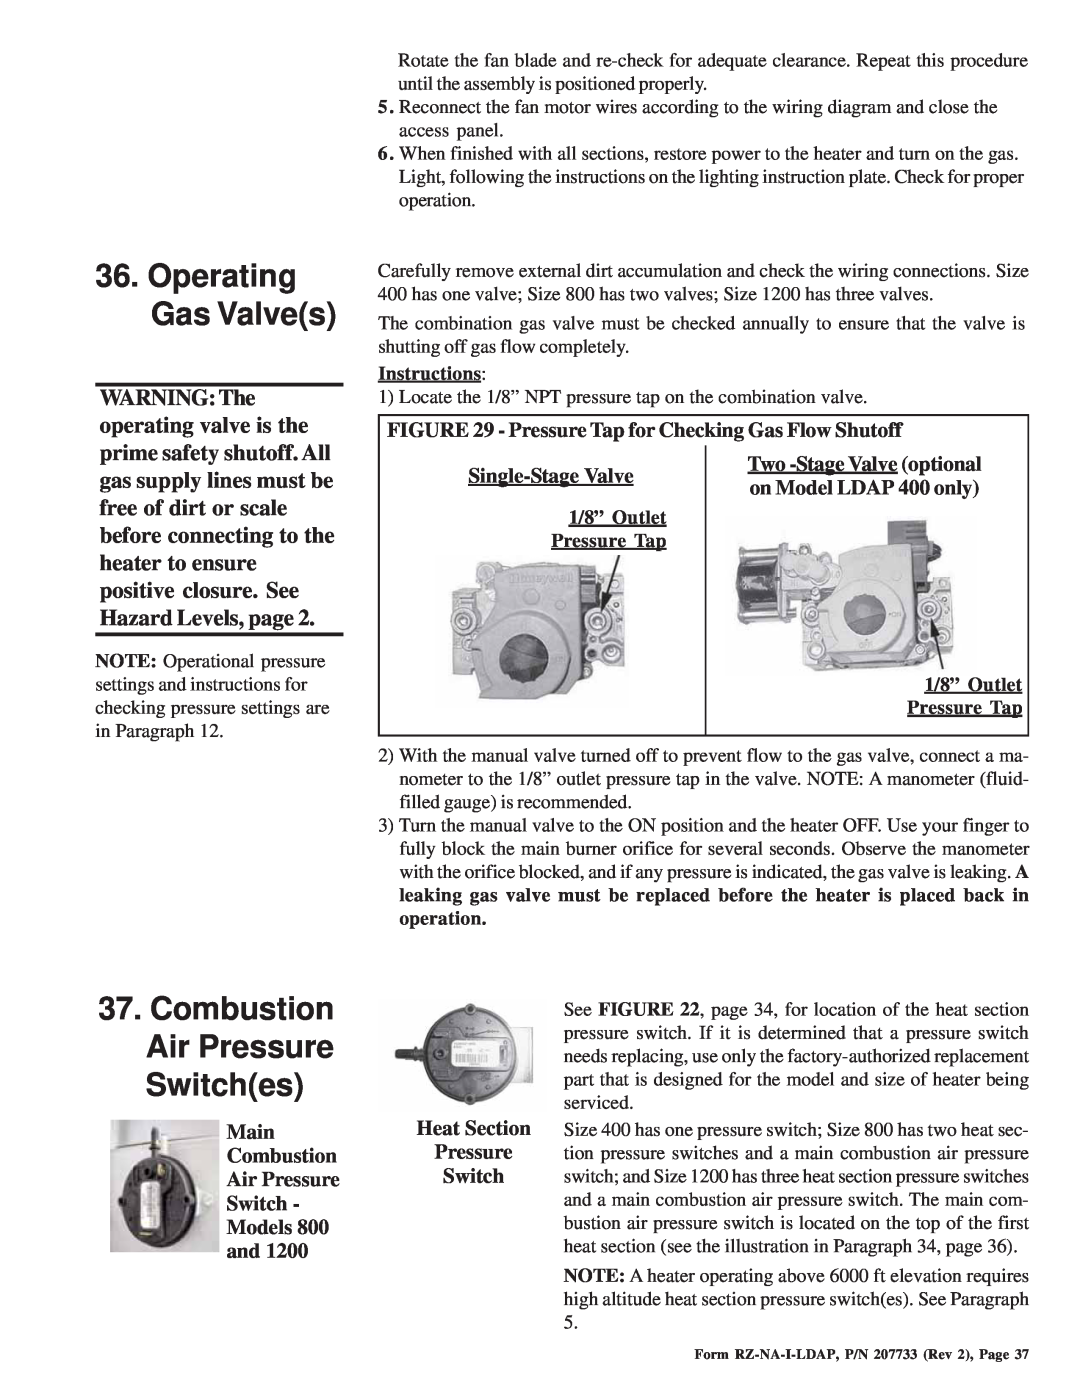 Thomas & Betts LDAP 1200 warranty Operating Gas Valves, Combustion Air Pressure Switches 